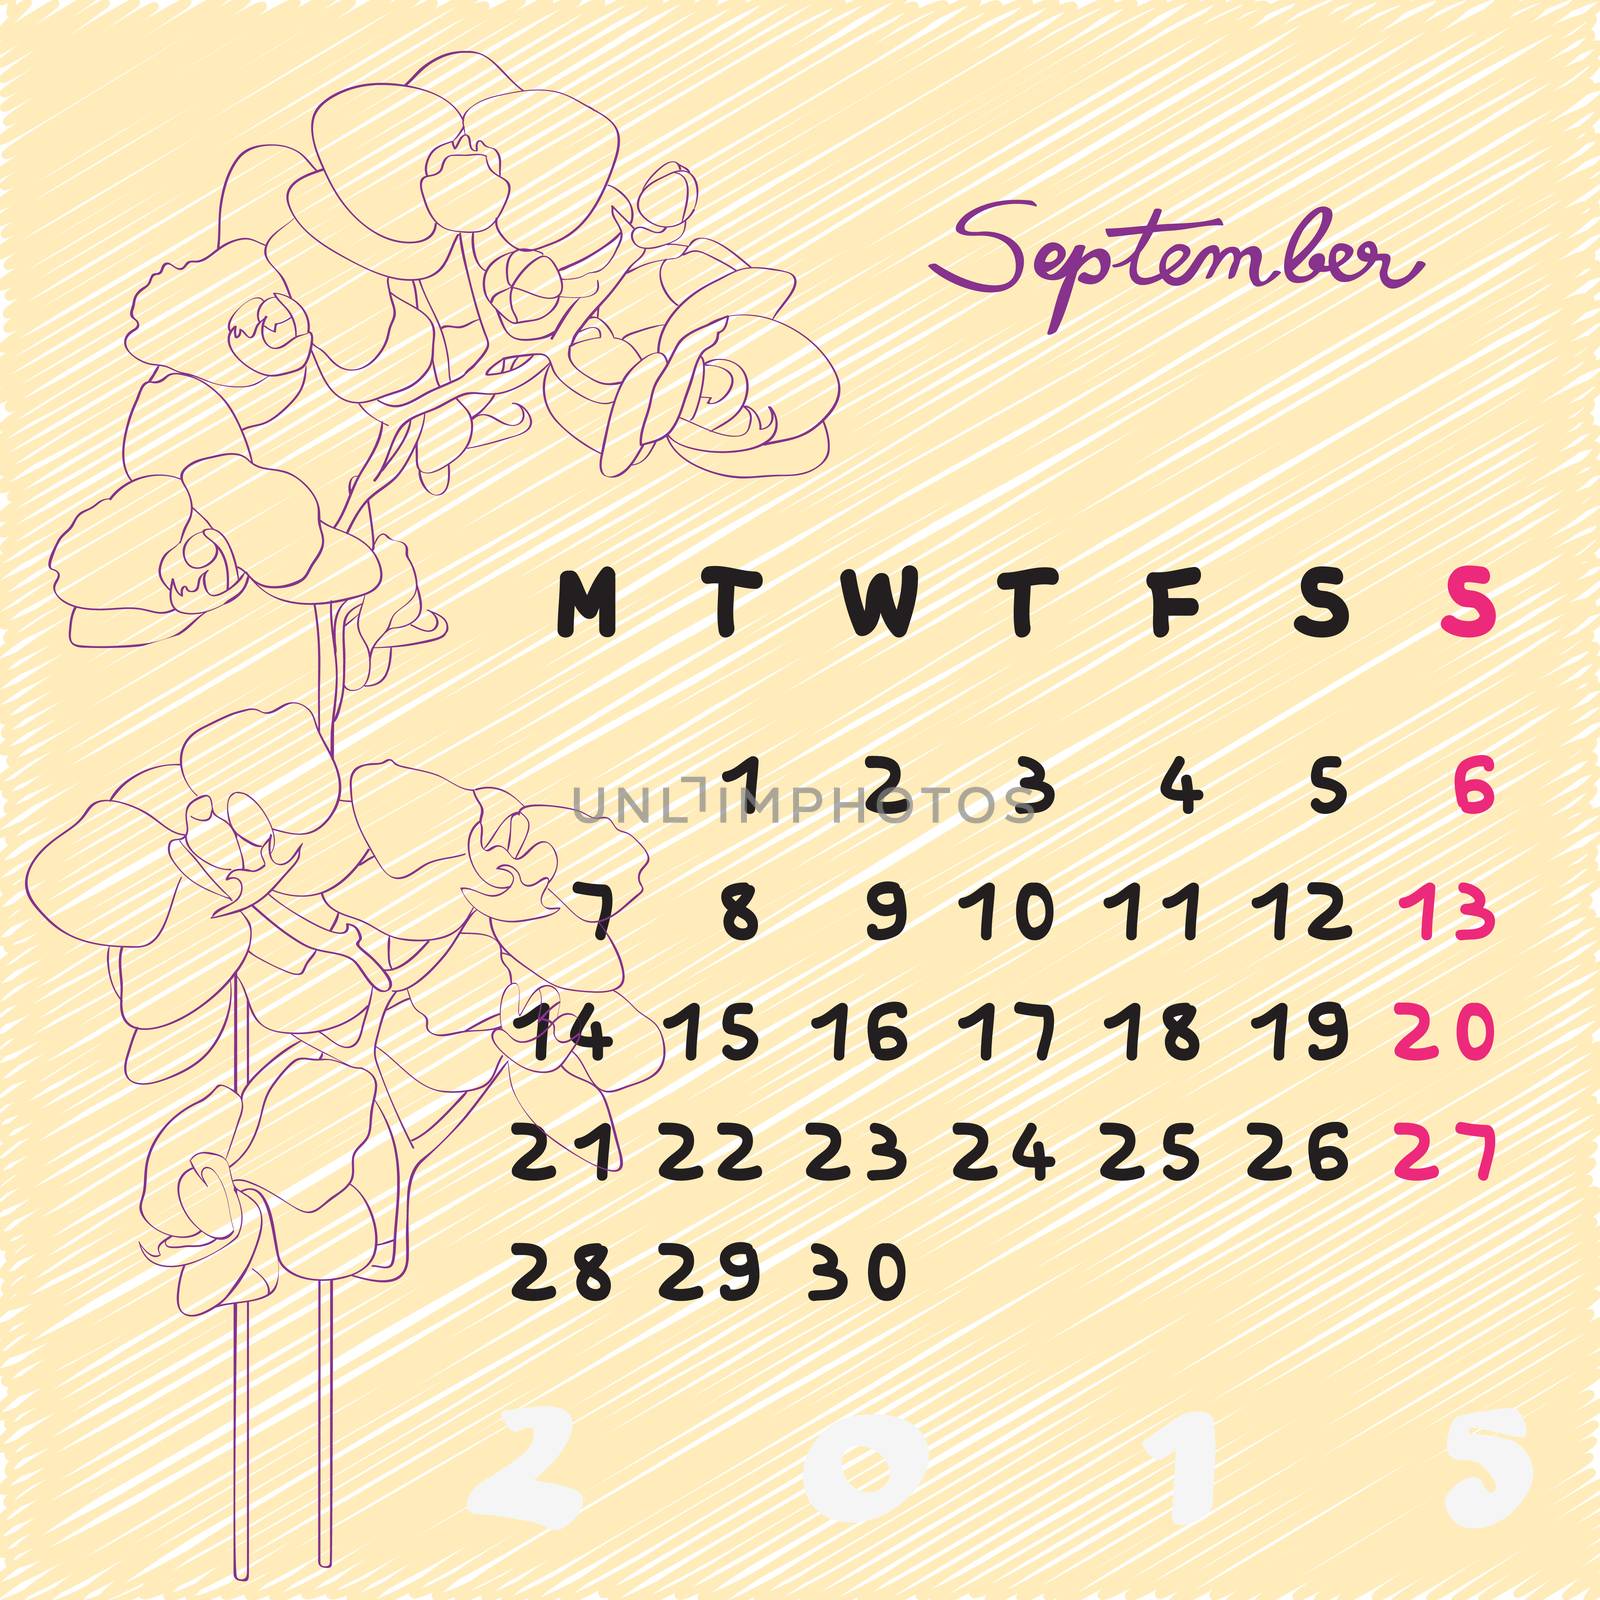 september 2015 flowers by catacos